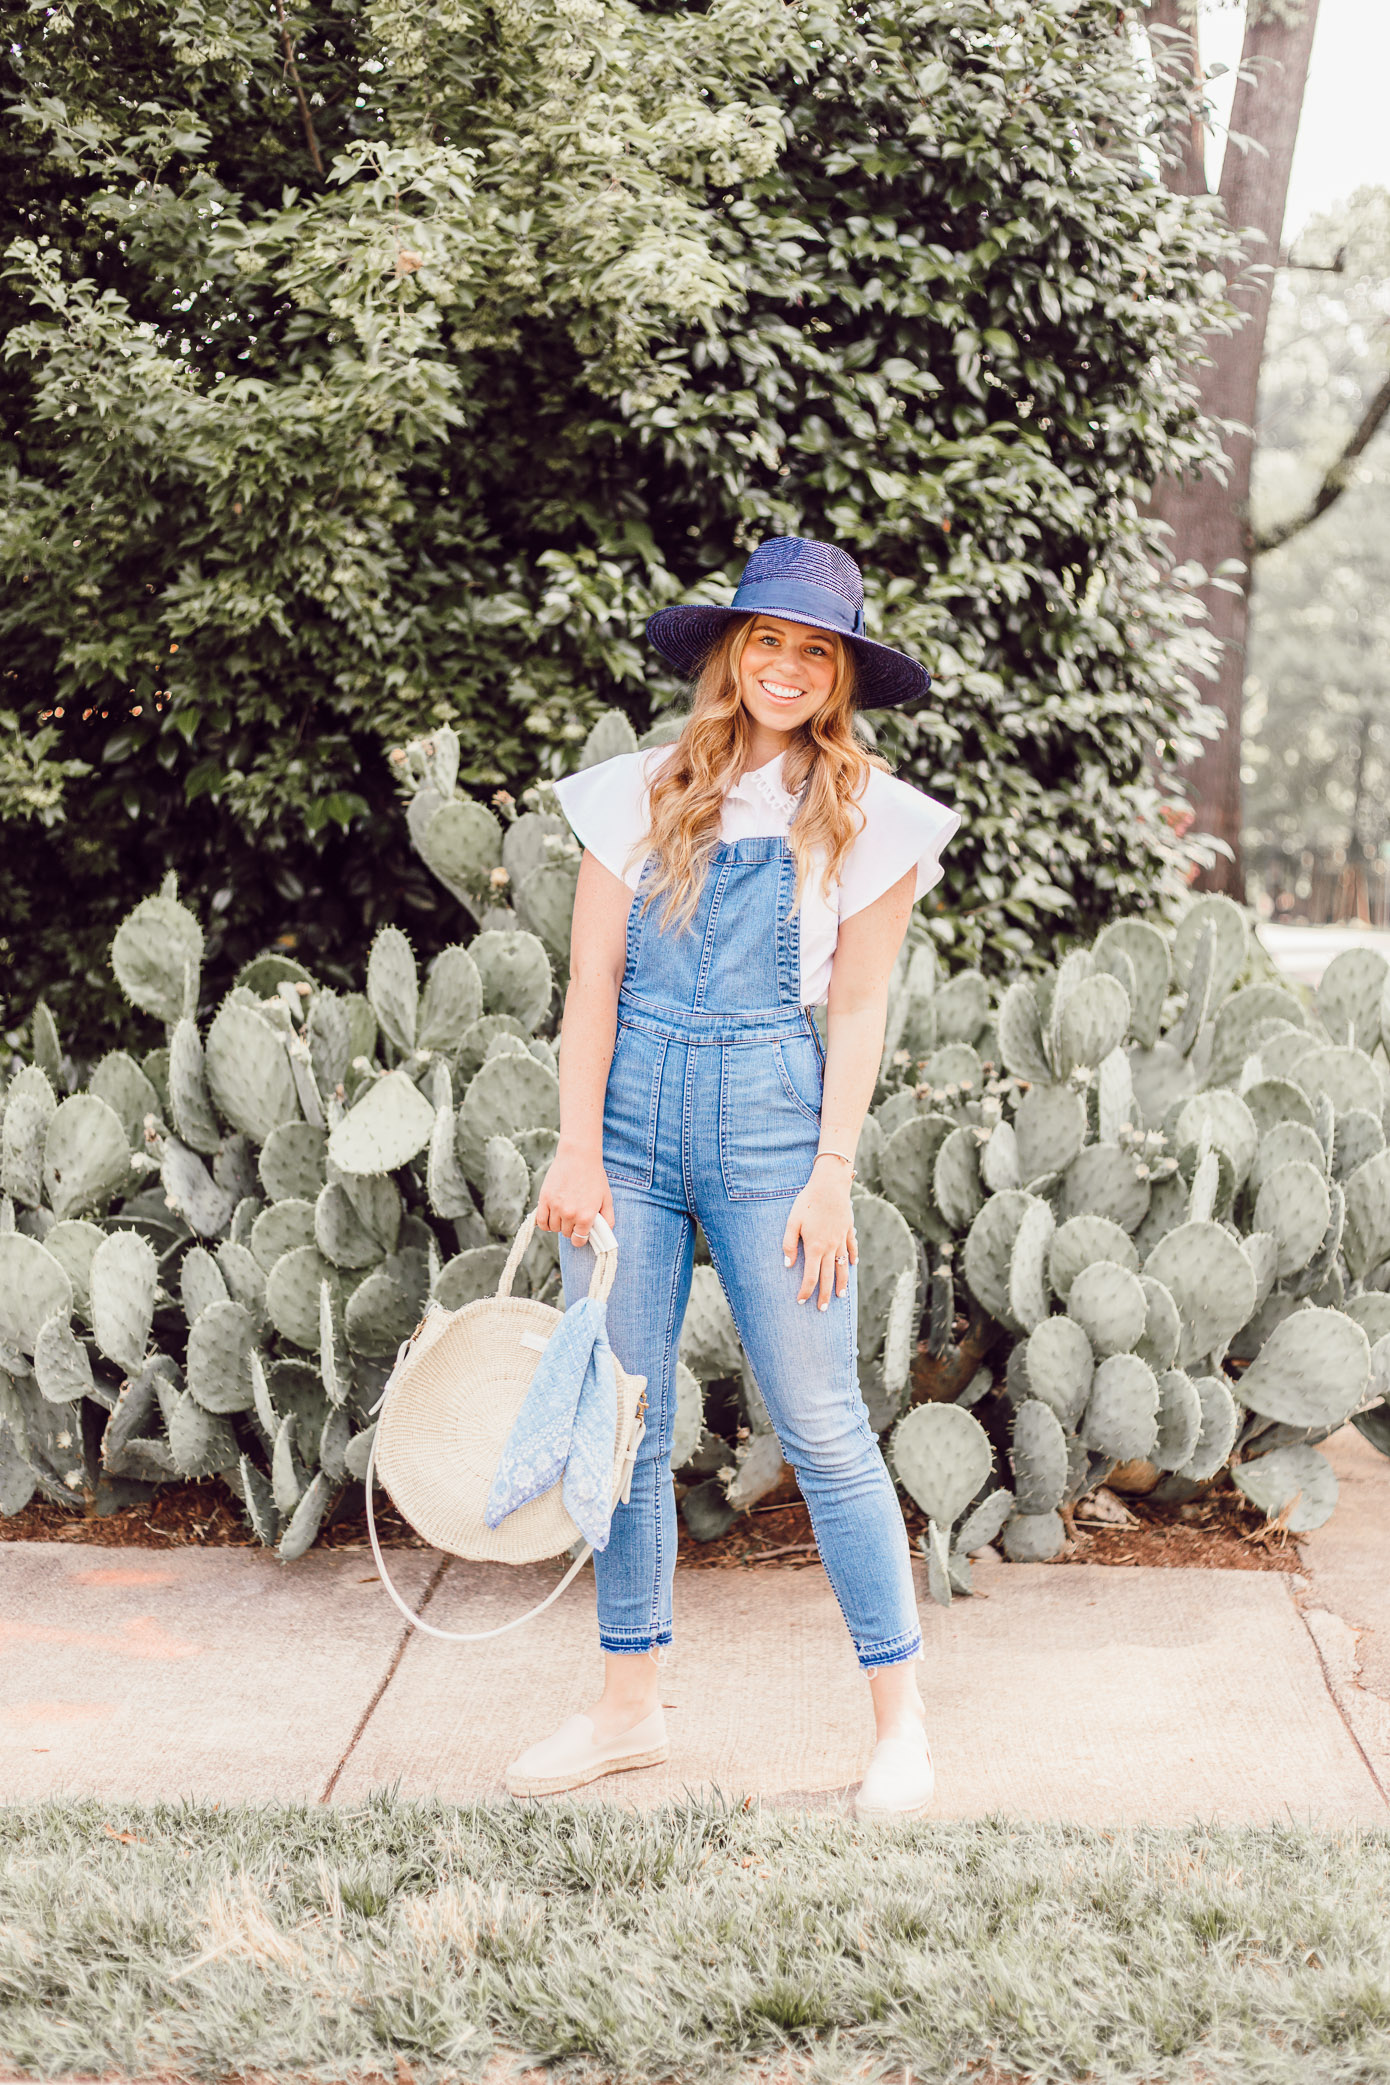 Summer Weekend Overalls Outfit Idea | How to Style Overalls for the Summer featured on Louella Reese #overalls #summerstyle